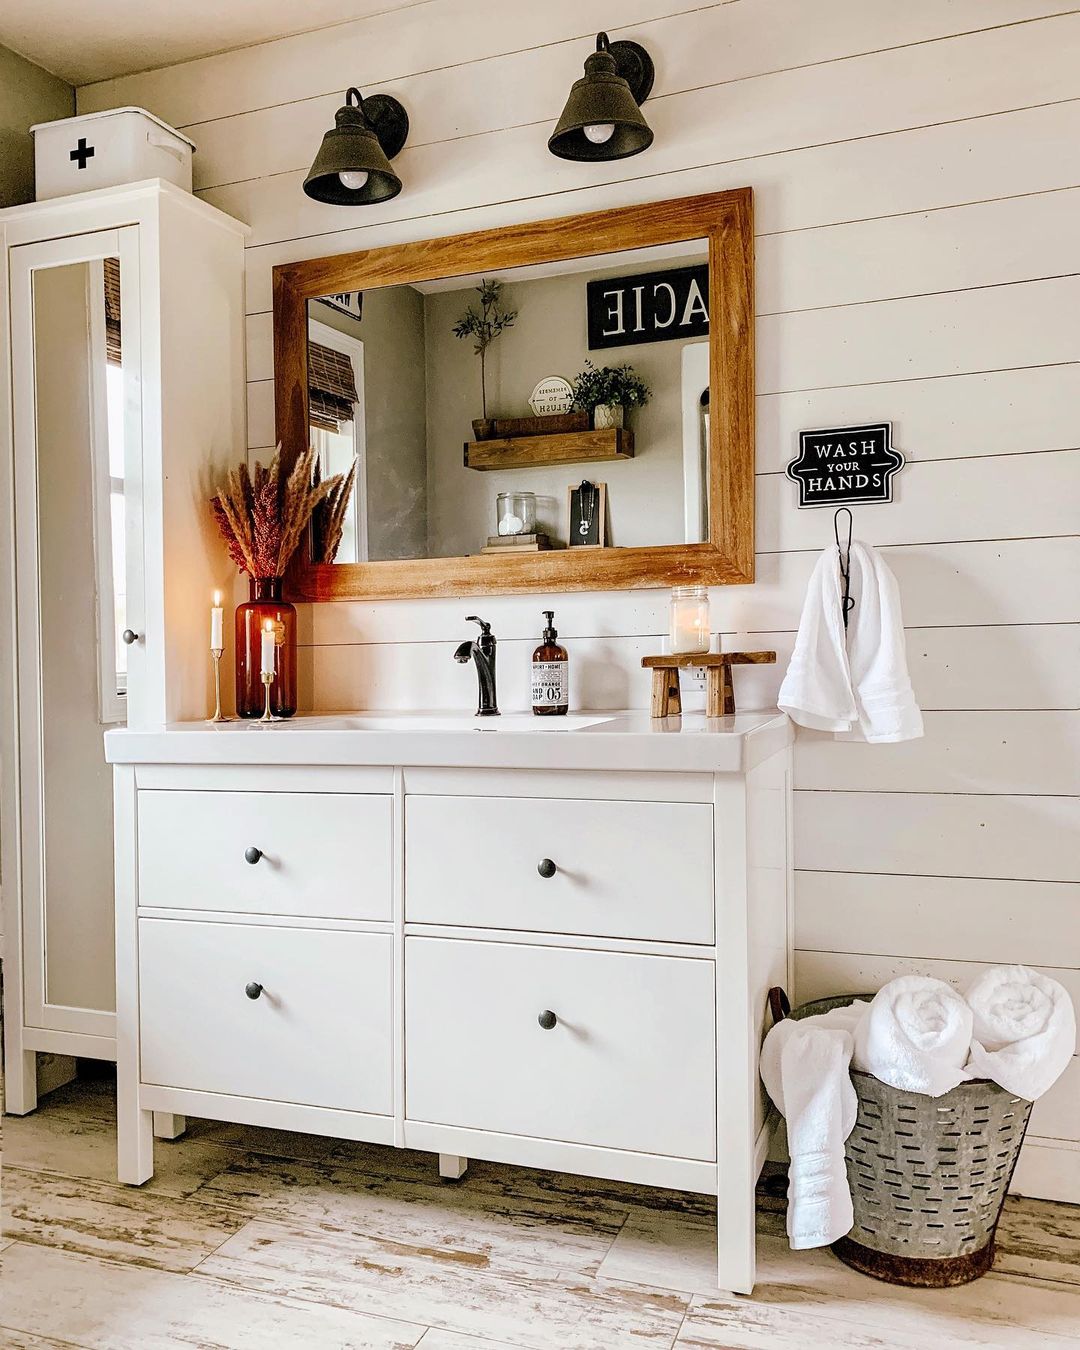 Shiplapped Bathroom with Wood Framed Mirror Above Sink. Photo by Instagram user @our_forever_farmhouse